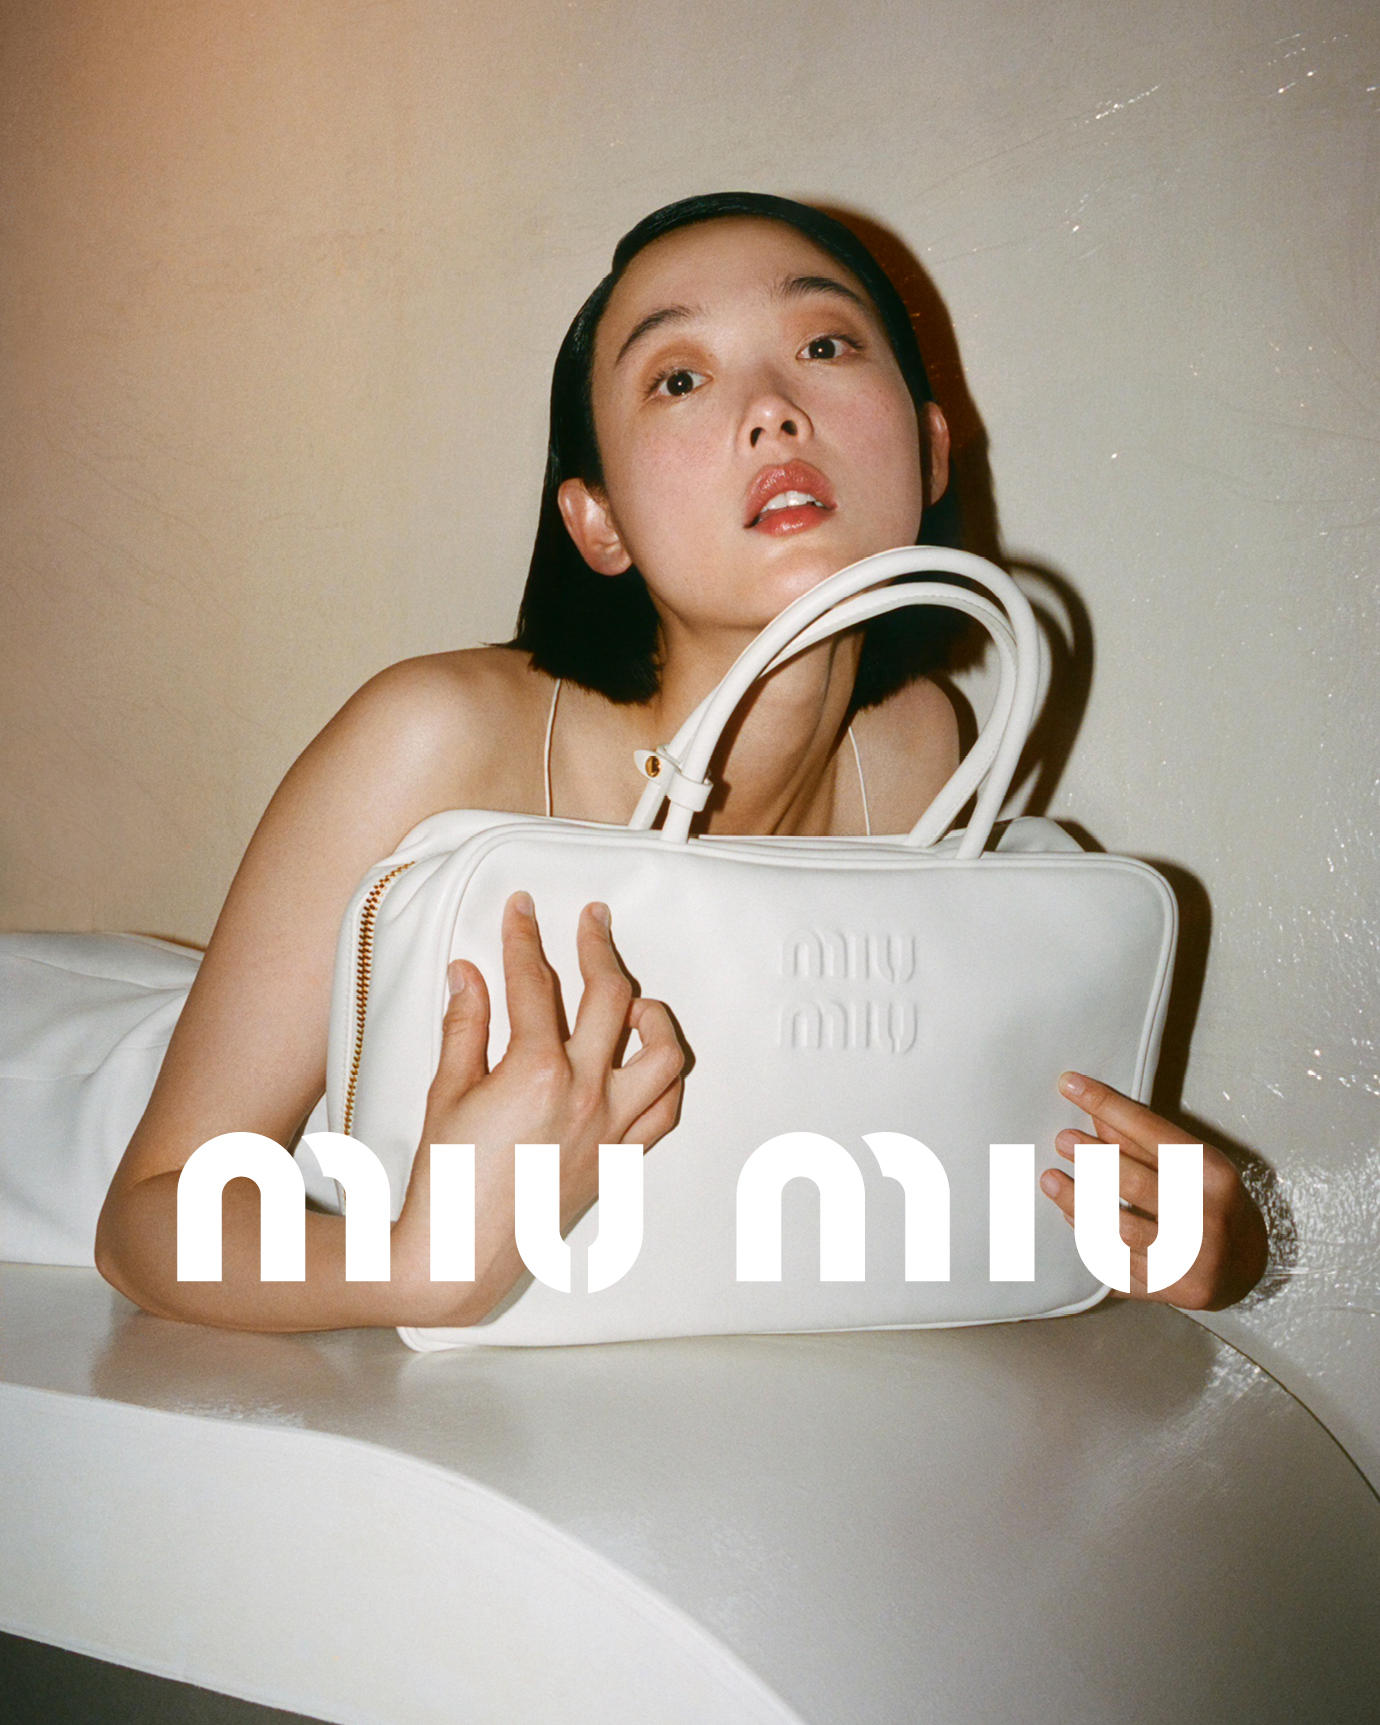 Miu Miu - Authentic, unmistakable, yours